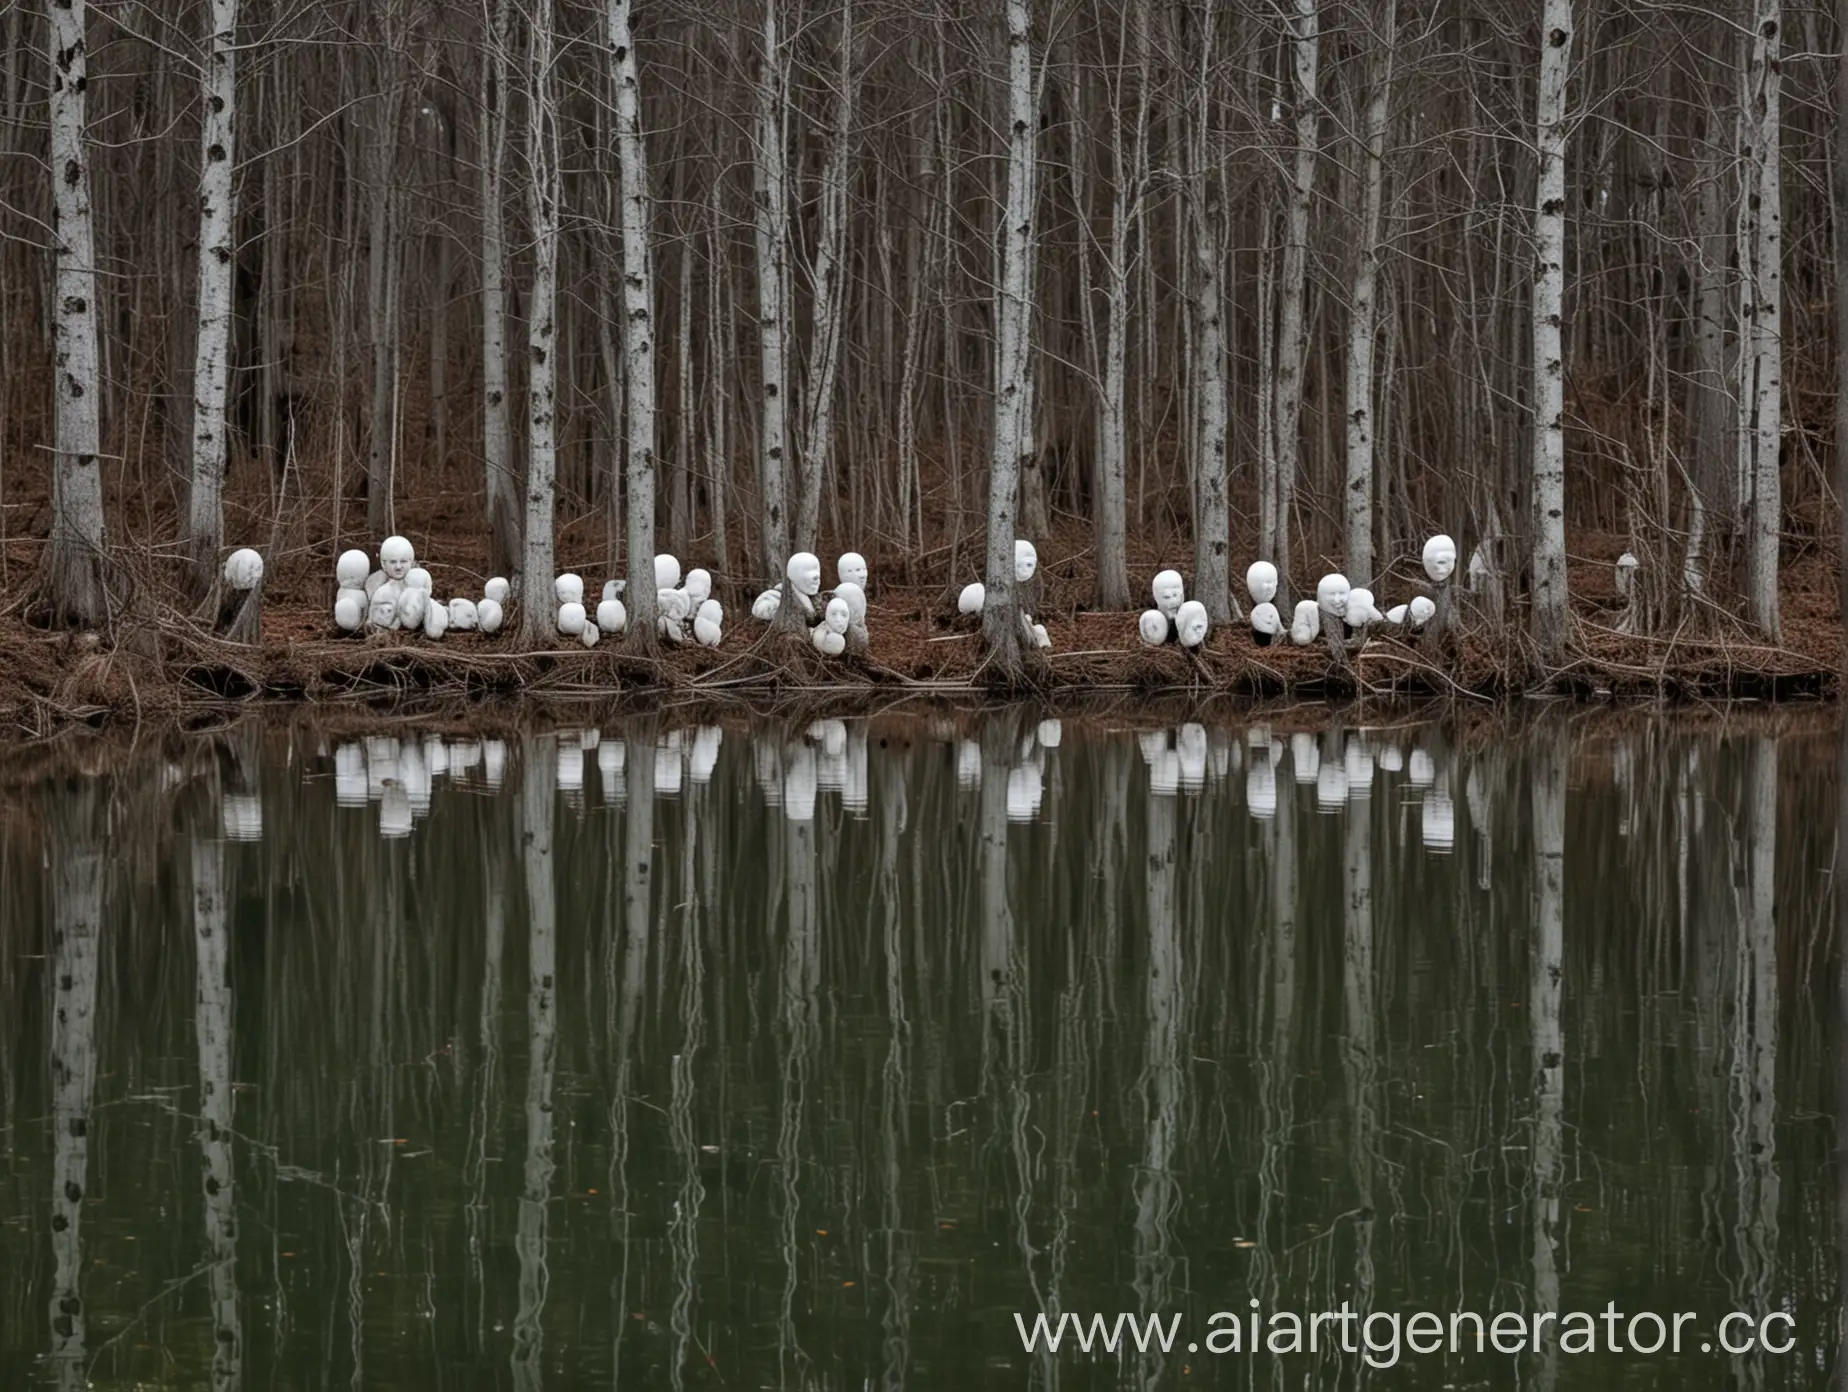 Small, round, white faces stared back at me from across the lake. Maybe 15-20 of them. All were positioned in such a way that their bodies were behind the trees and only their heads were visible. The best way I can describe the faces is like very pale, somehow internally illuminated children.